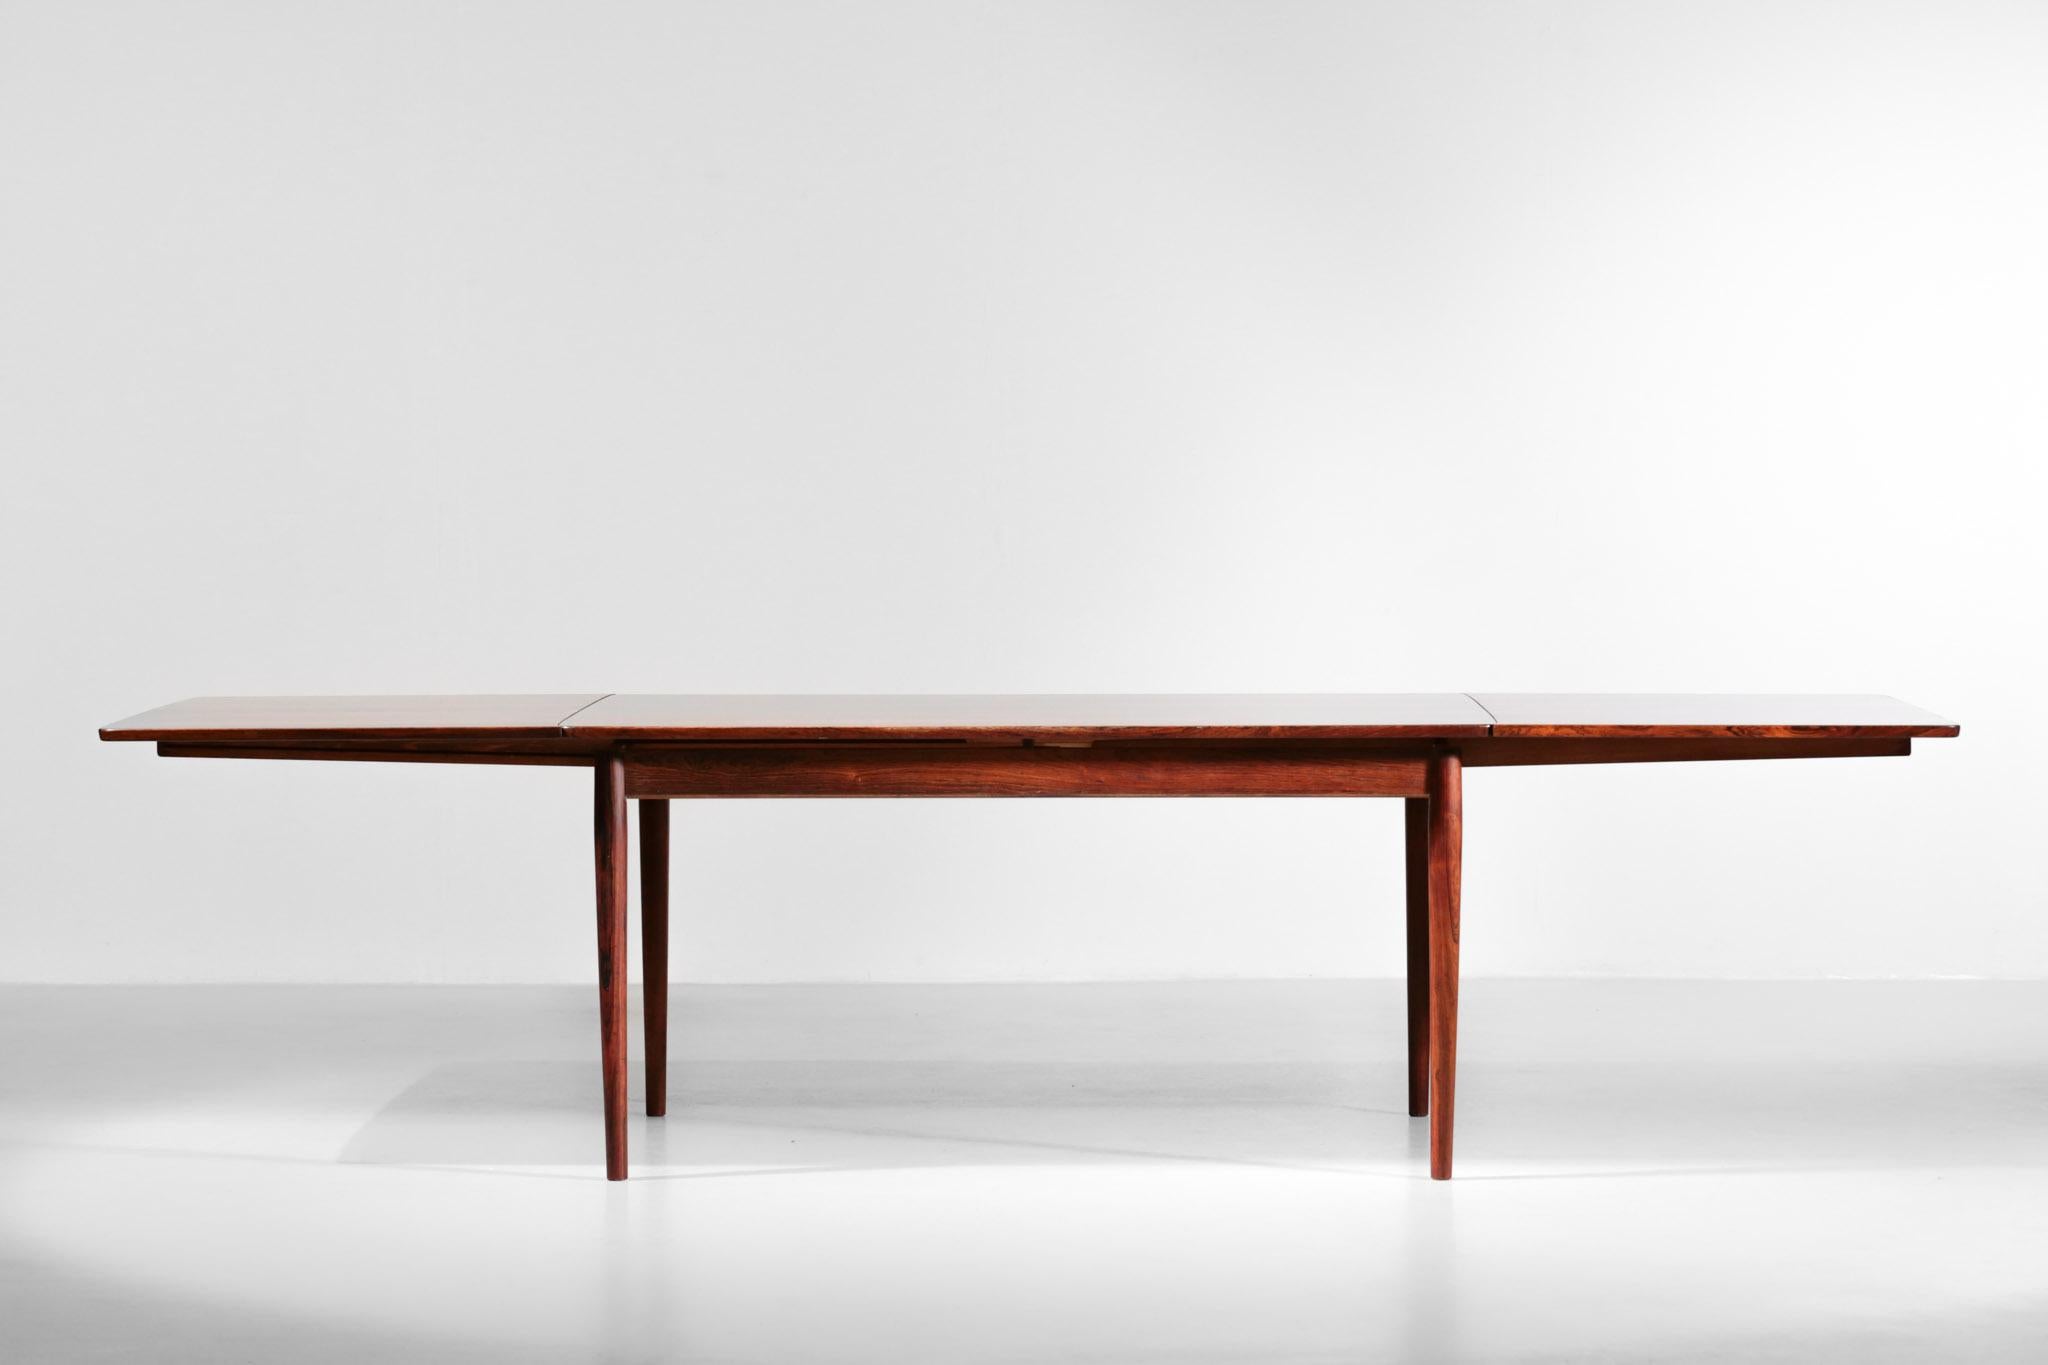 Large Scandinavian dining table from the 60's designed by the Danish designer Arne Vodder for Sibast. Structure in solid wood and veneer, with a beautiful flame grain. The table has 2 extensions at the end to double the surface of the table top.